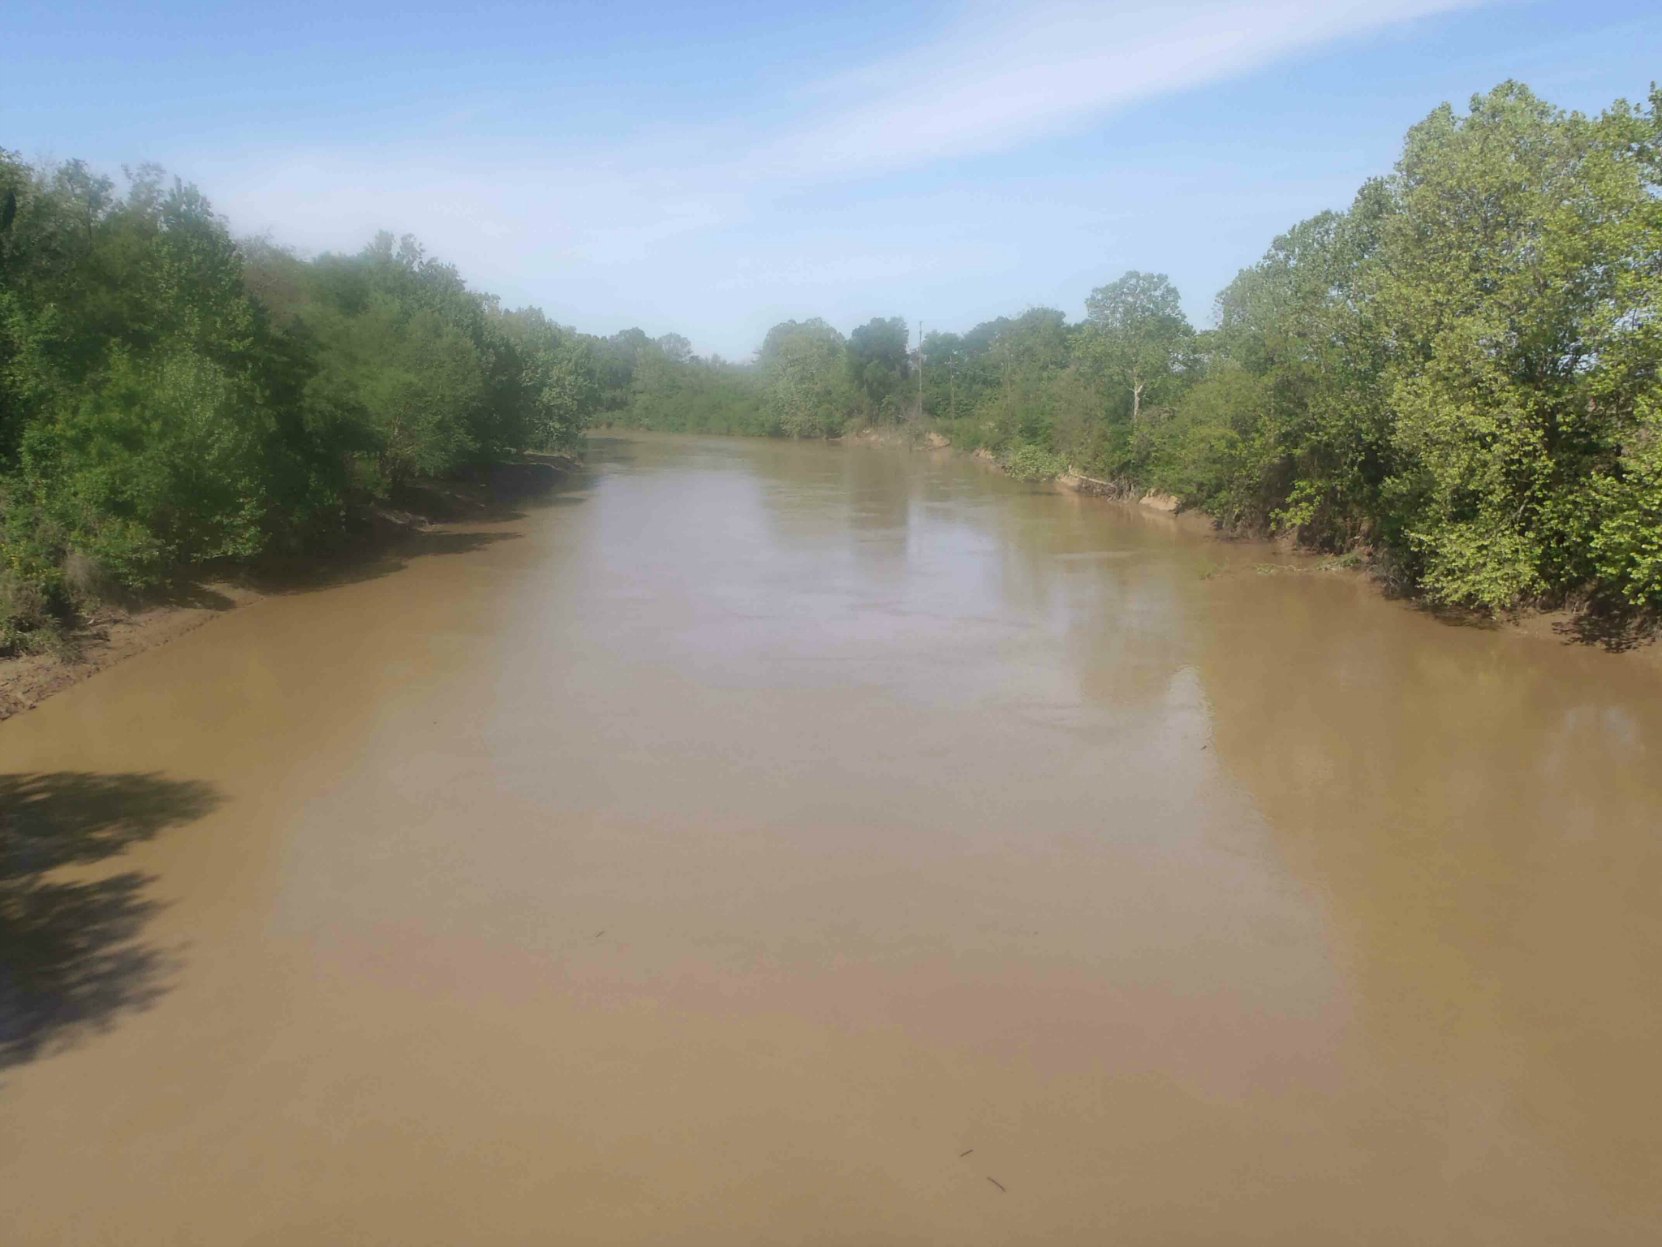 The Tallahatchee River, as seen from the "Tallahatchee Bridge" on Grand Avenue, Greenwood, Mississippi, near the Mississippi Country Music Trail marker for Bobbie Gentry